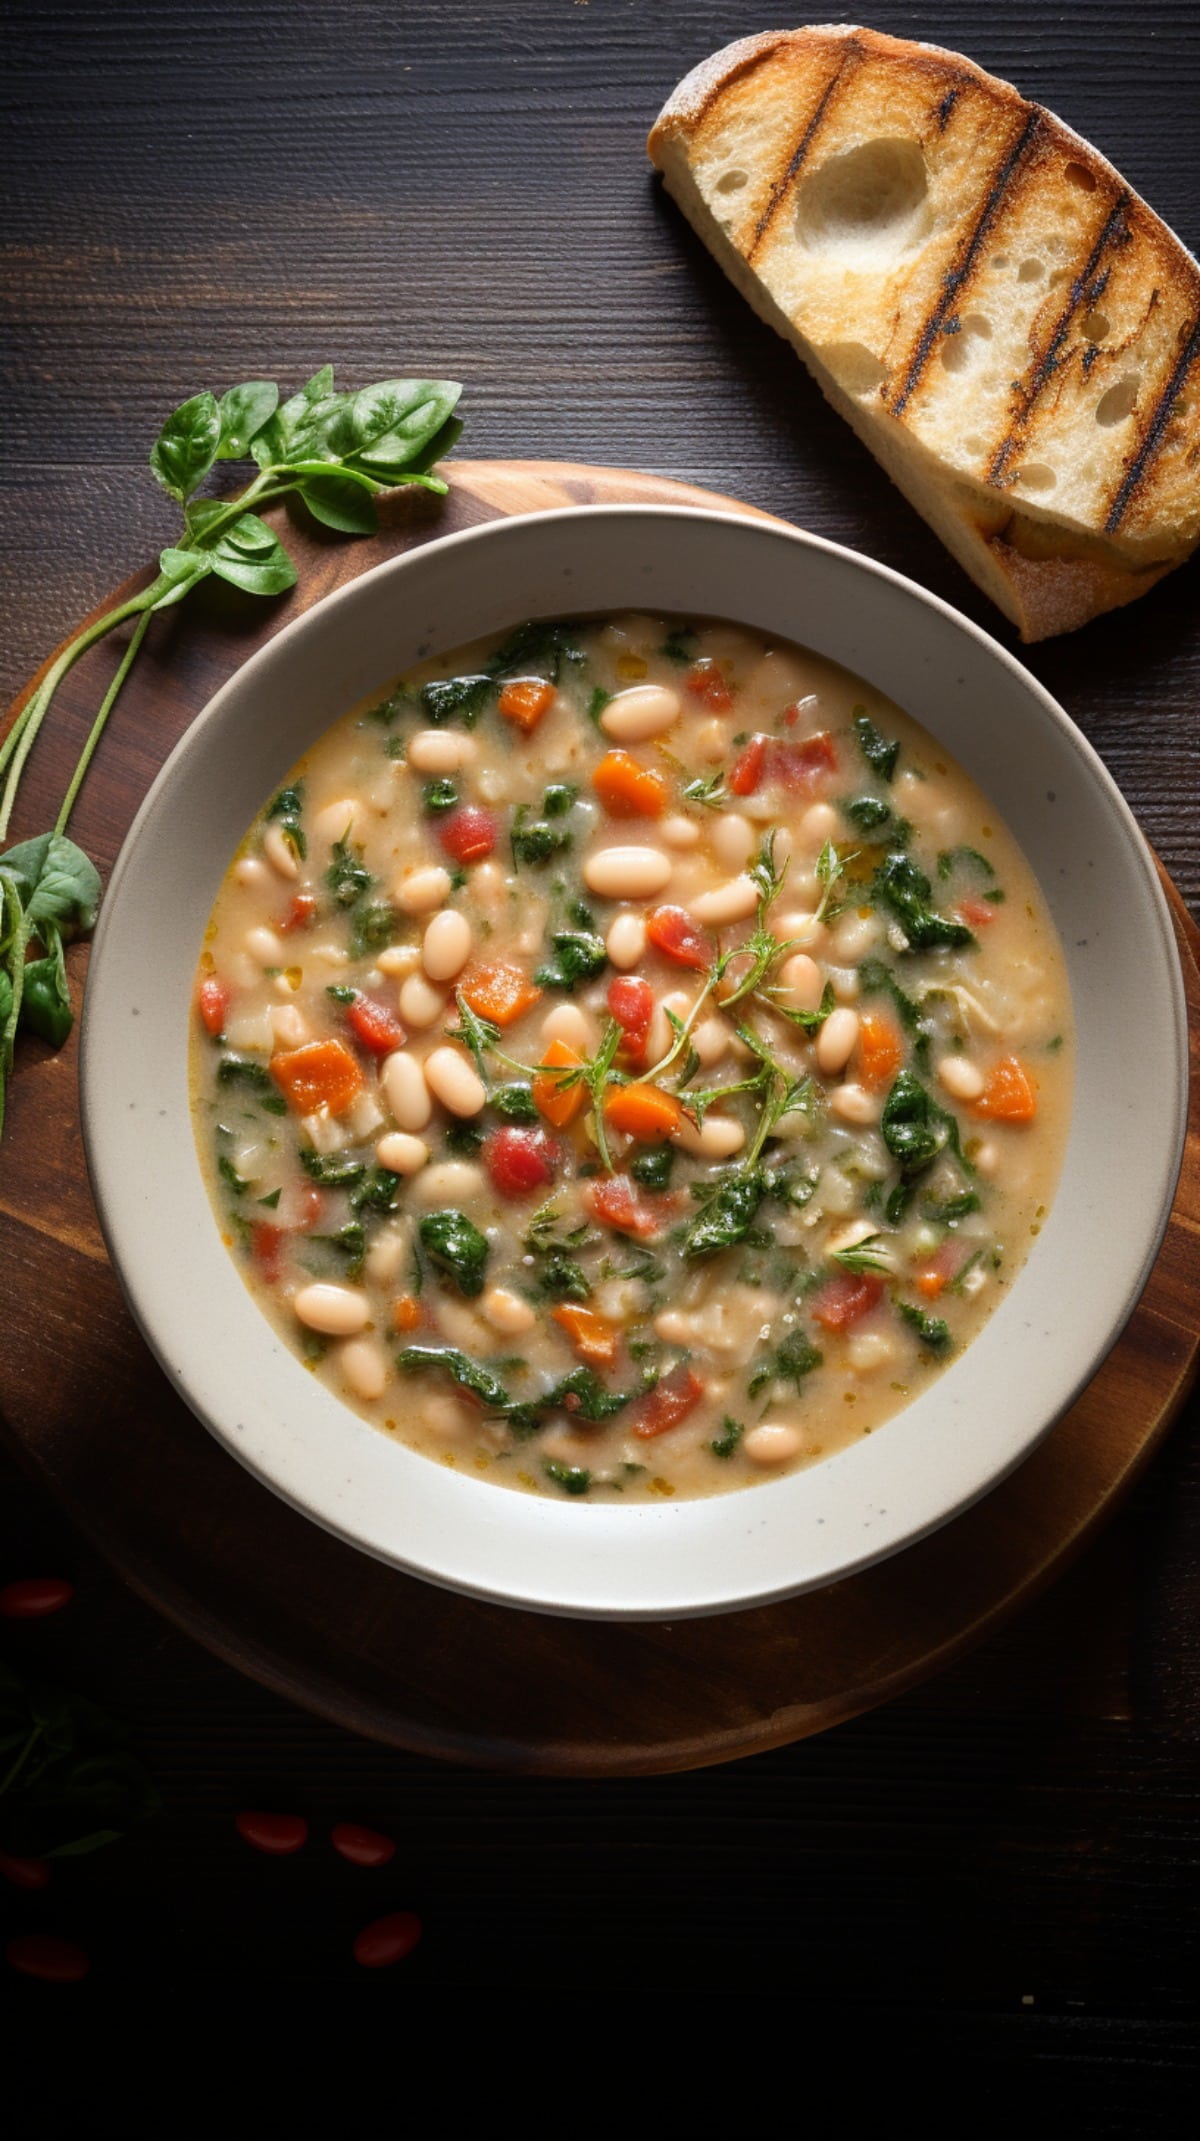 Tuscan white bean soup with grilled bread